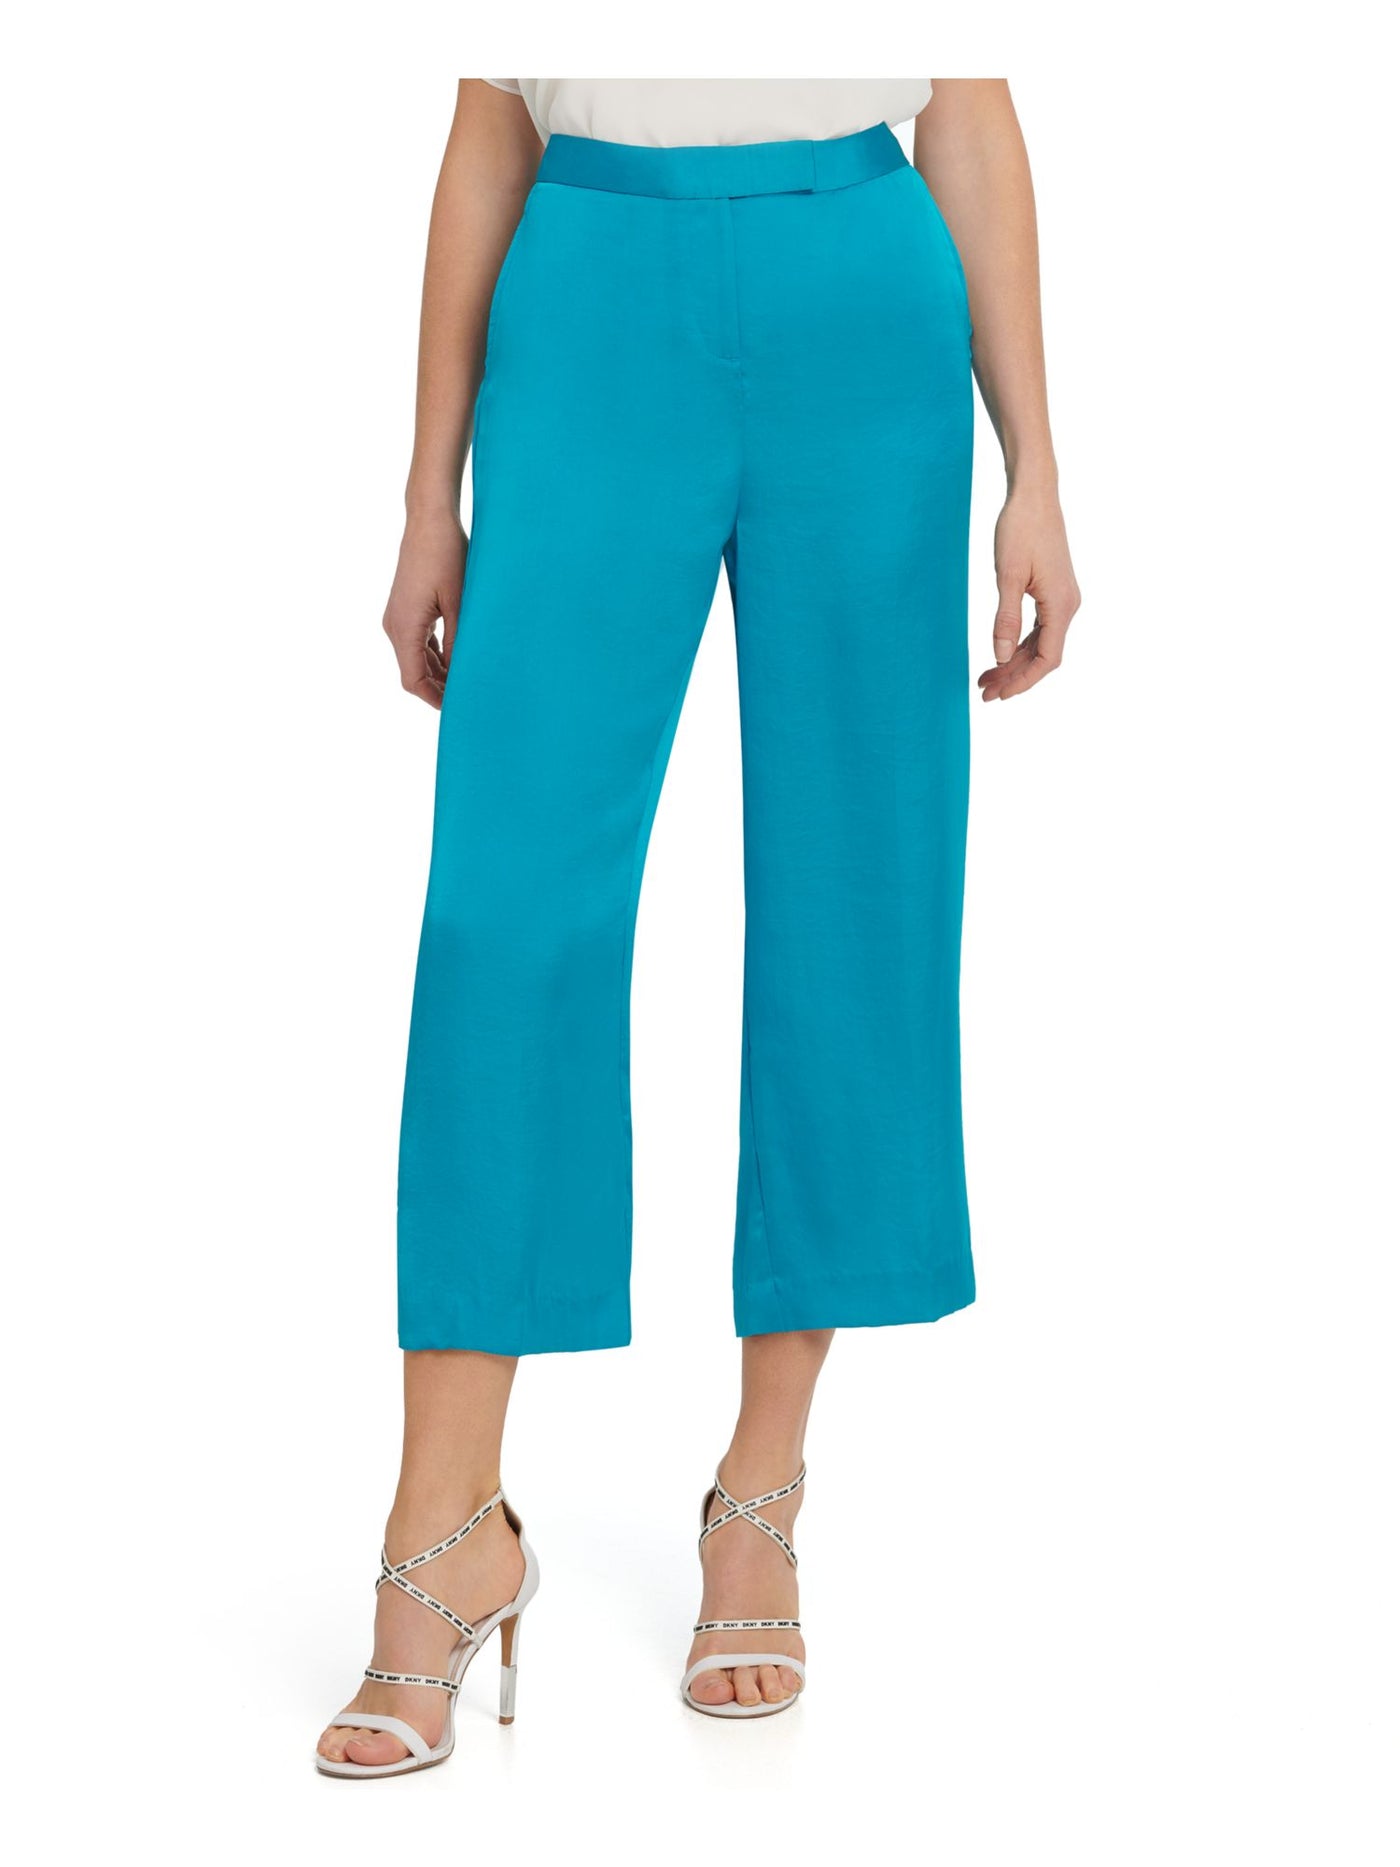 DKNY Womens Blue Zippered Pocketed Satin Cropped Wear To Work Wide Leg Pants 8